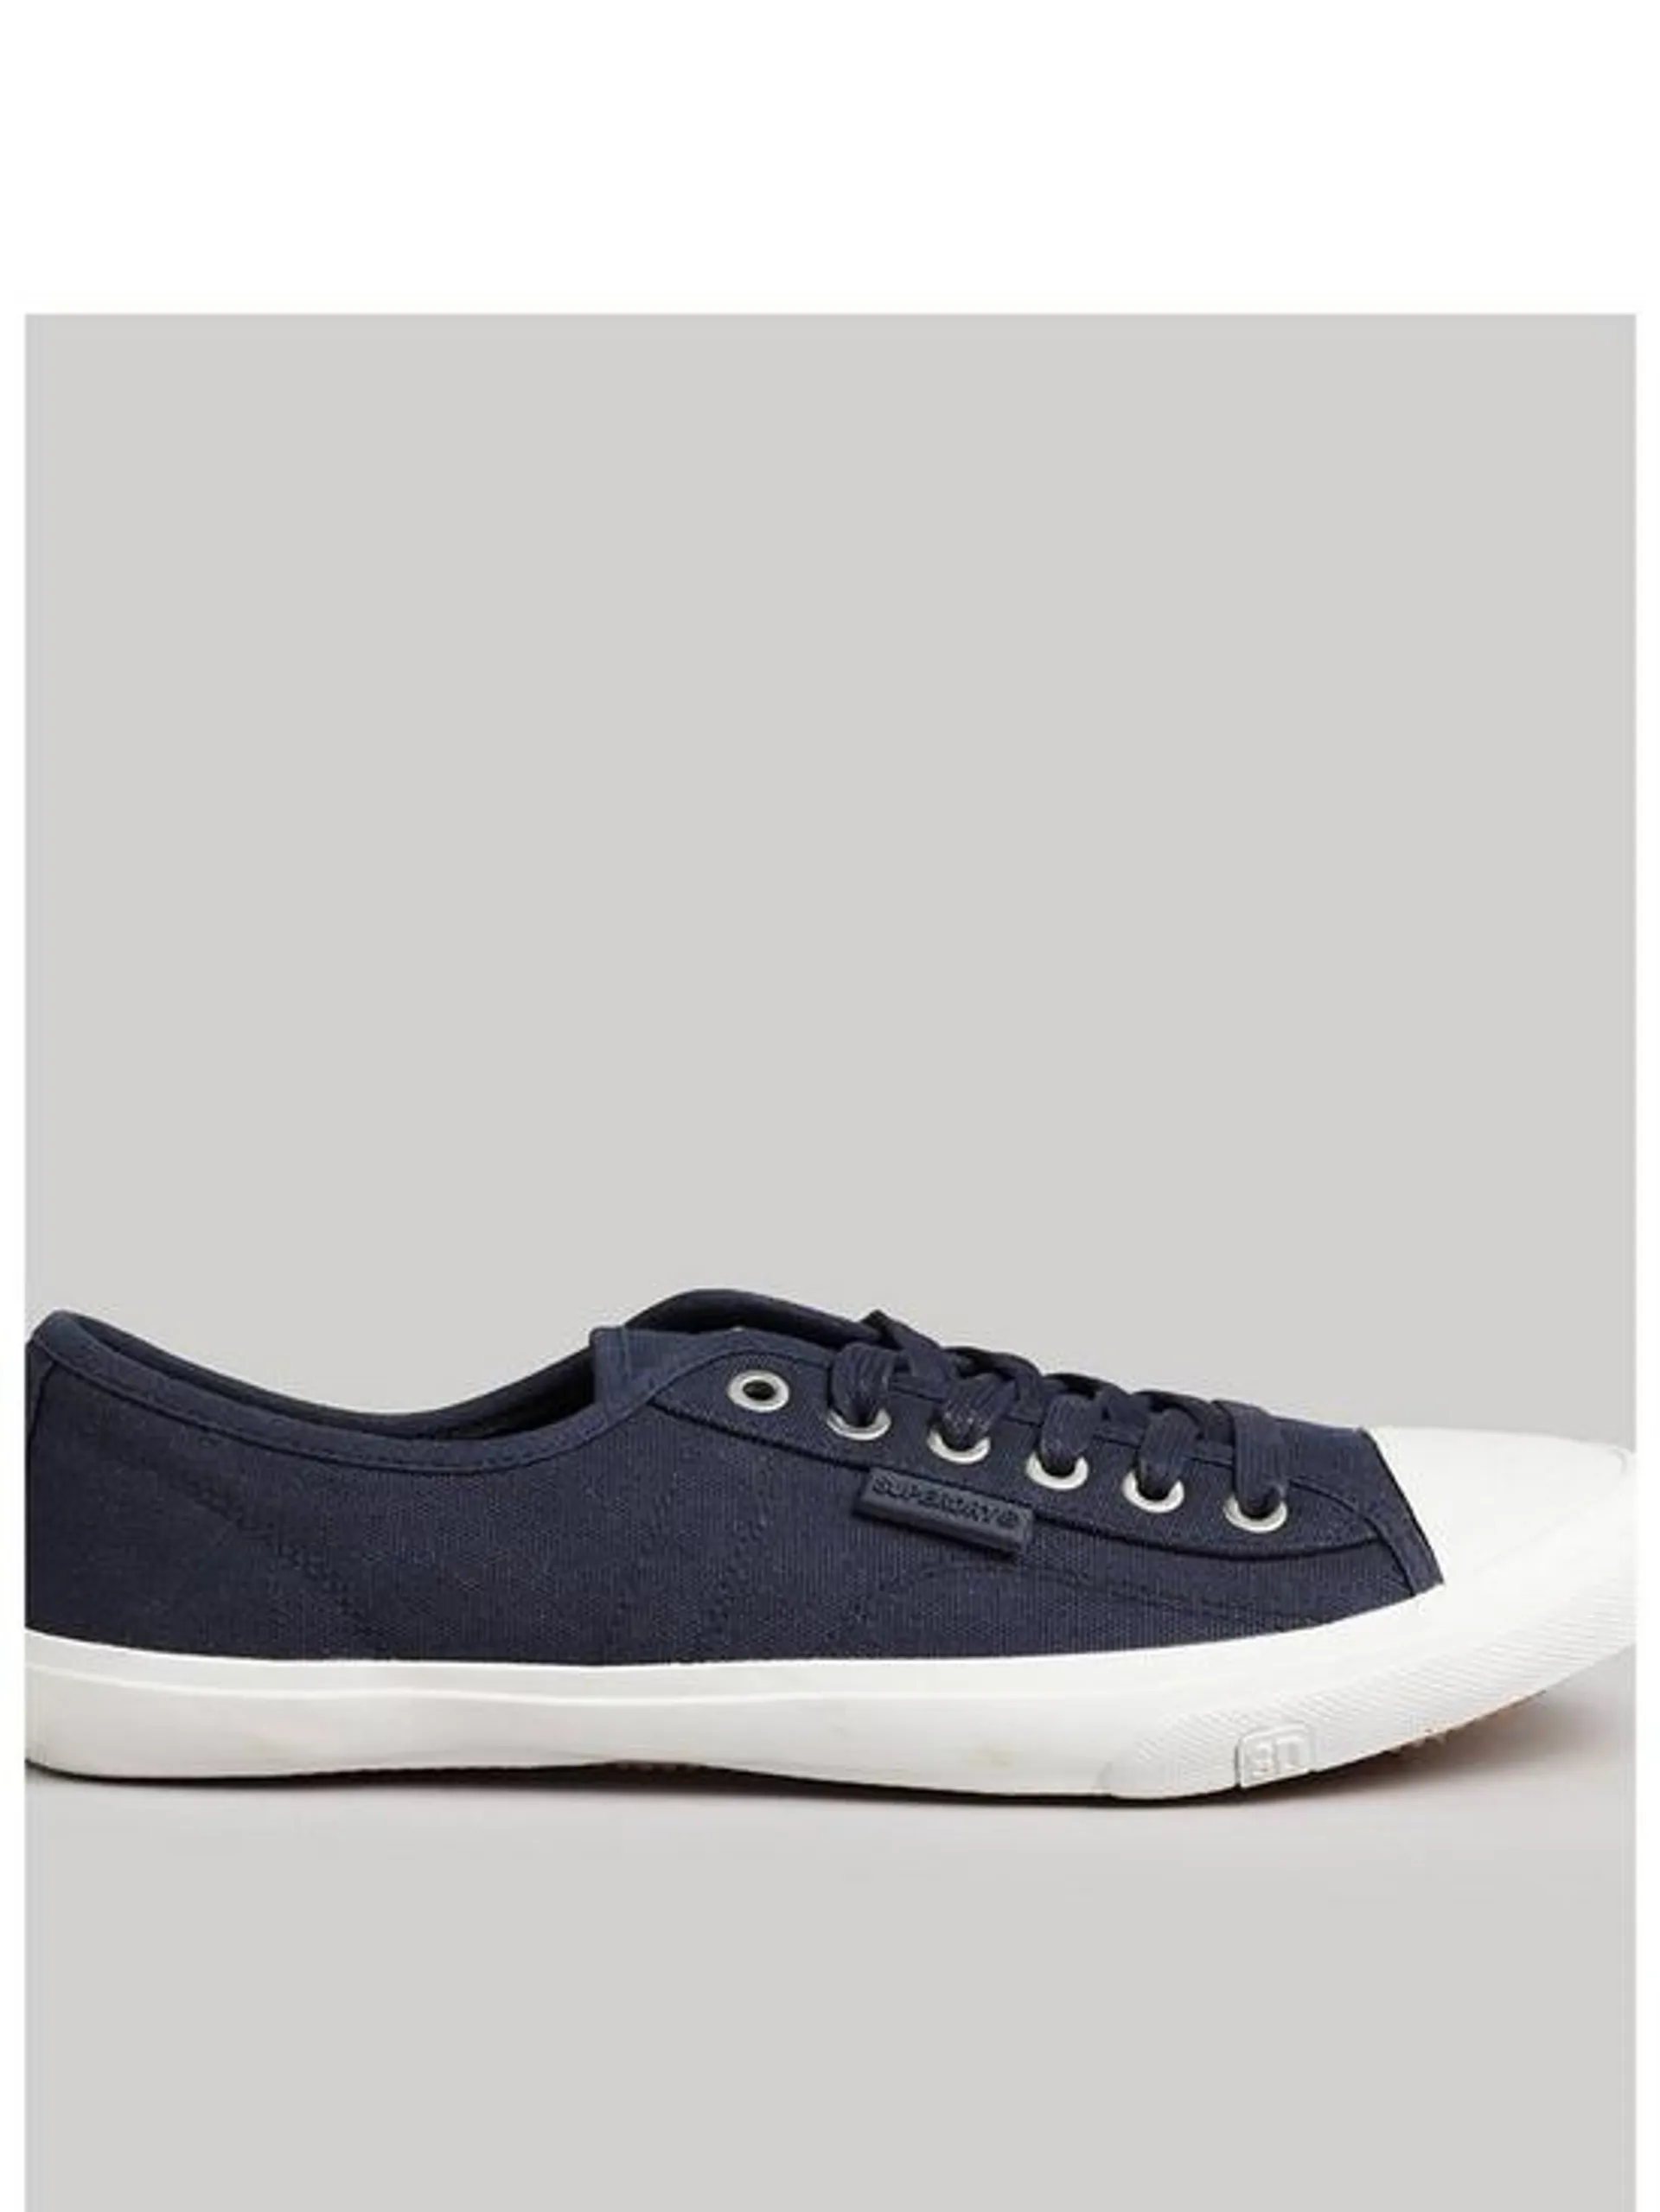 Low Pro Trainers - Navy